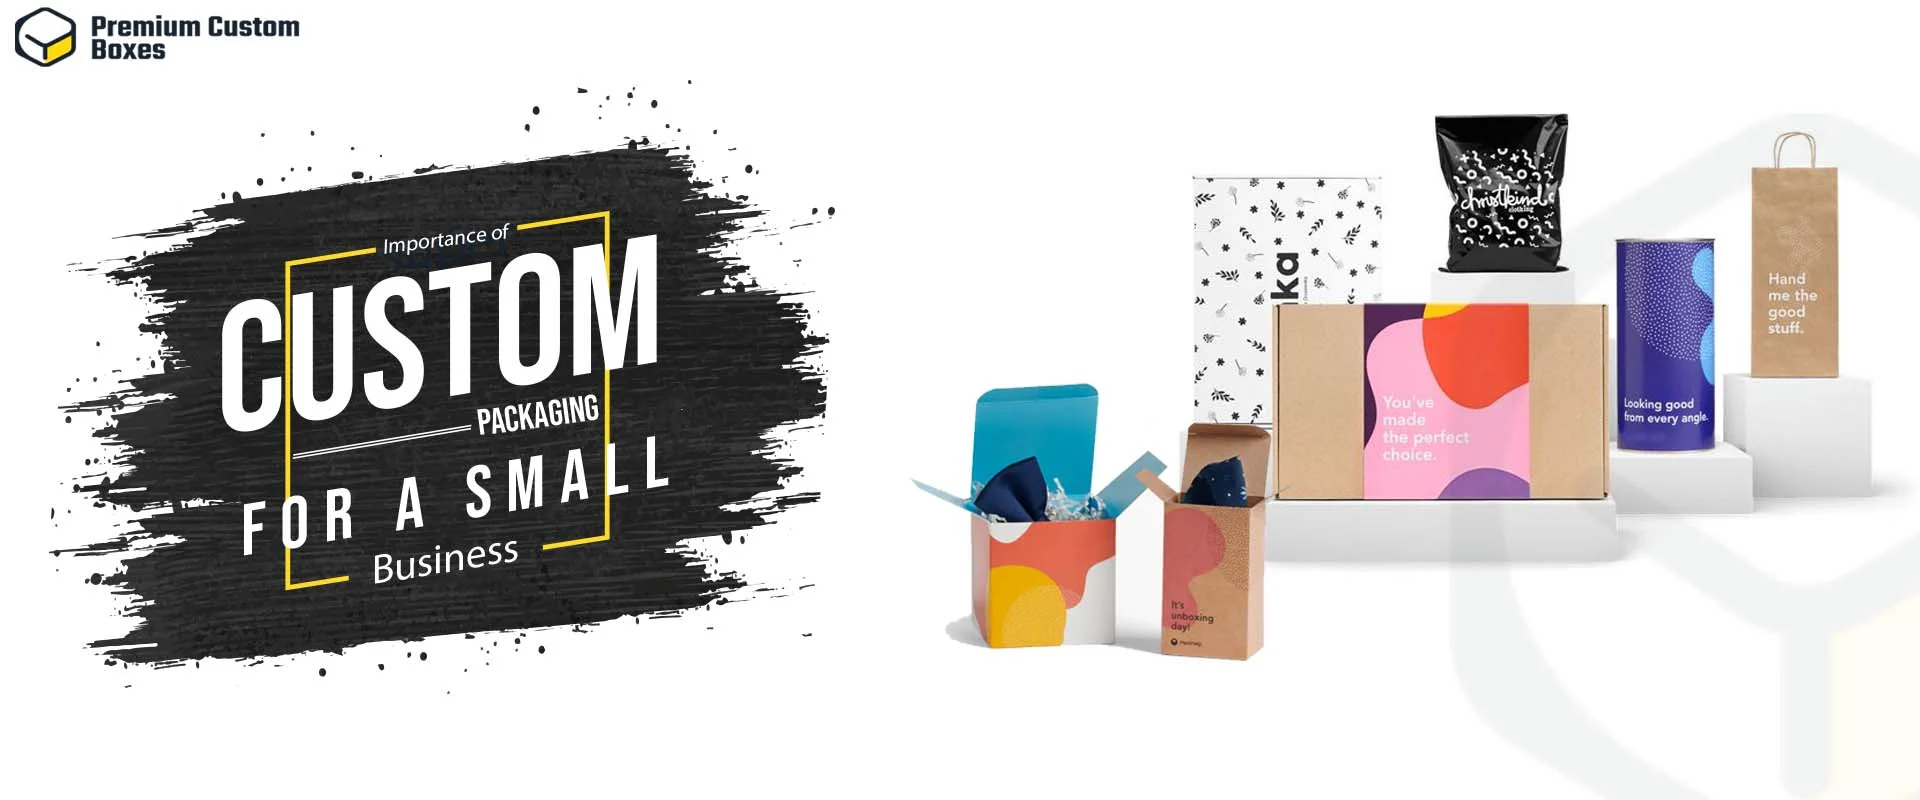 Importance Of Custom Packaging For a Small Business